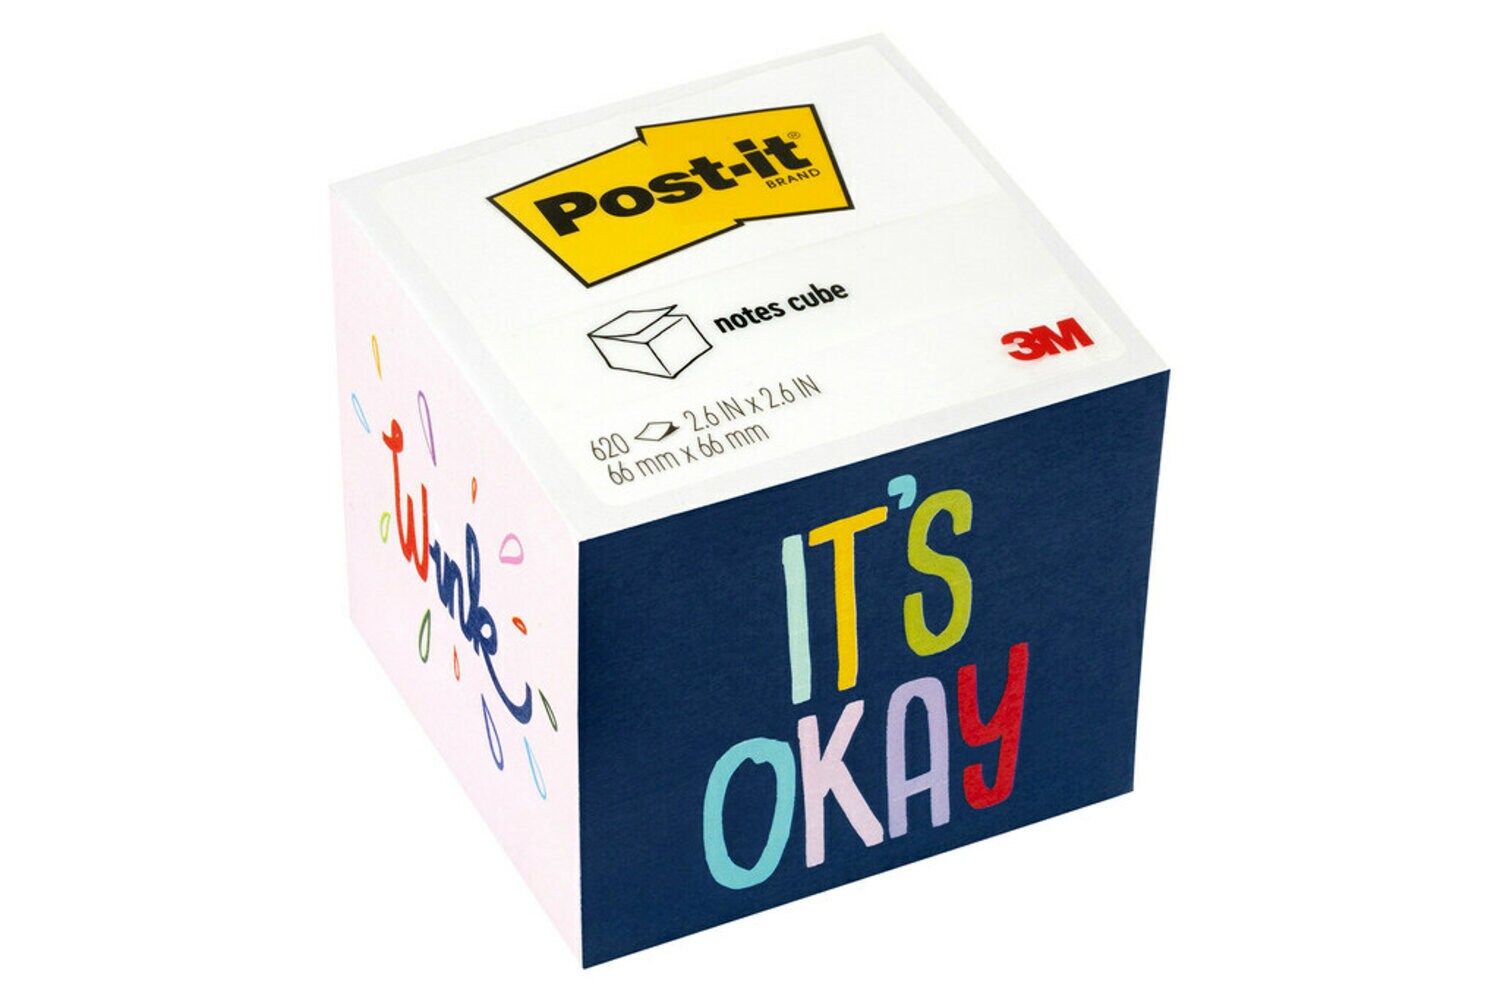 7100241141 - Post-it Notes Cube CUBE-OKAY, 2.6 in x 2.6 in (66 mm x 66 mm)